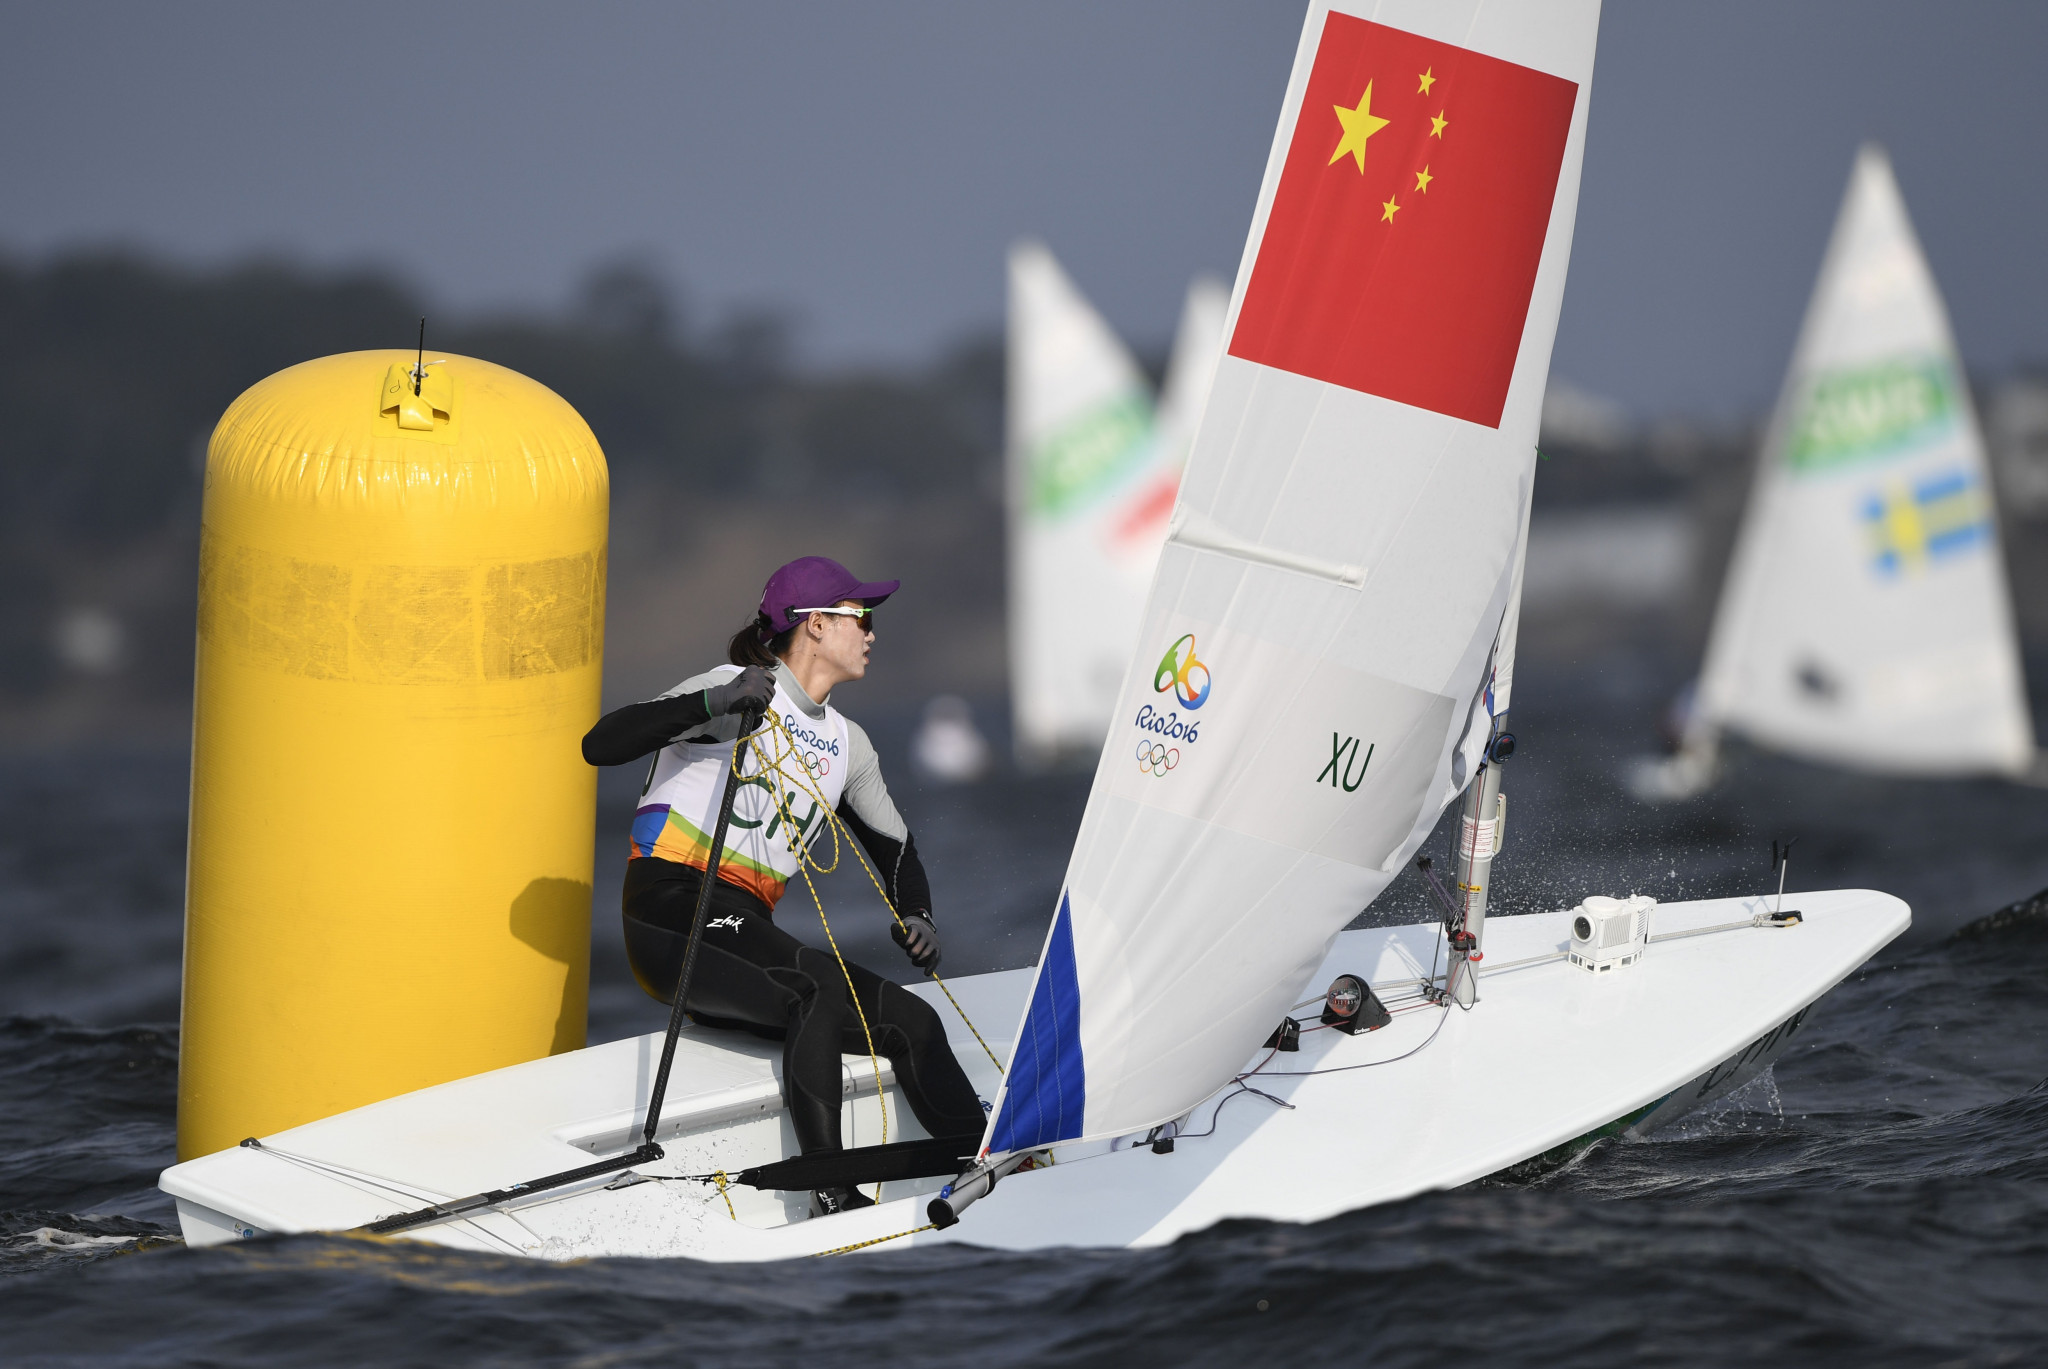 Chinese Olympic sailing champion Xu Lijia is a reporter and presenter on The Ocean Race show in China ©Getty Images